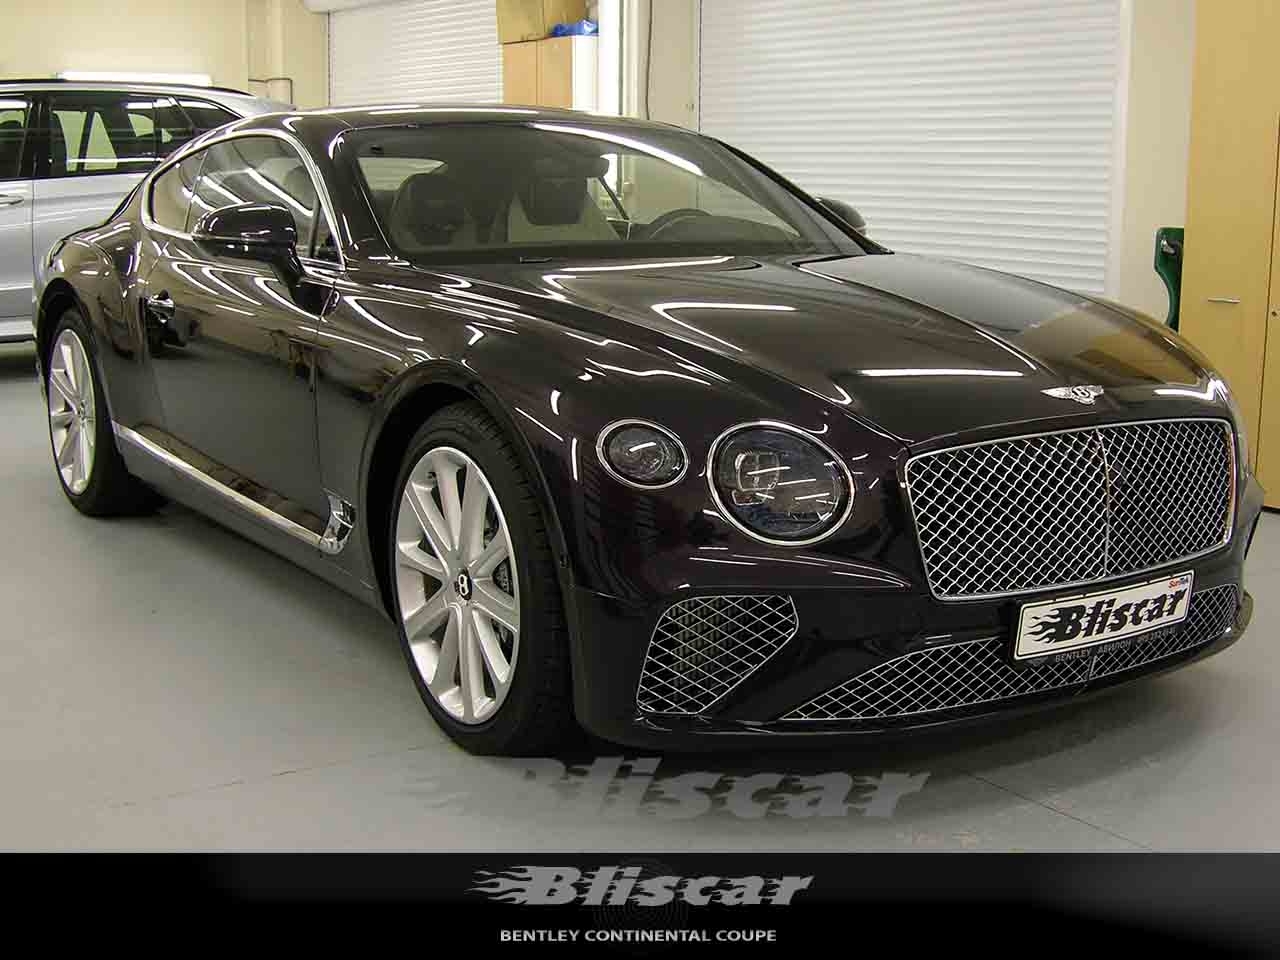 BENTLEY CONTINENTAL COUPE